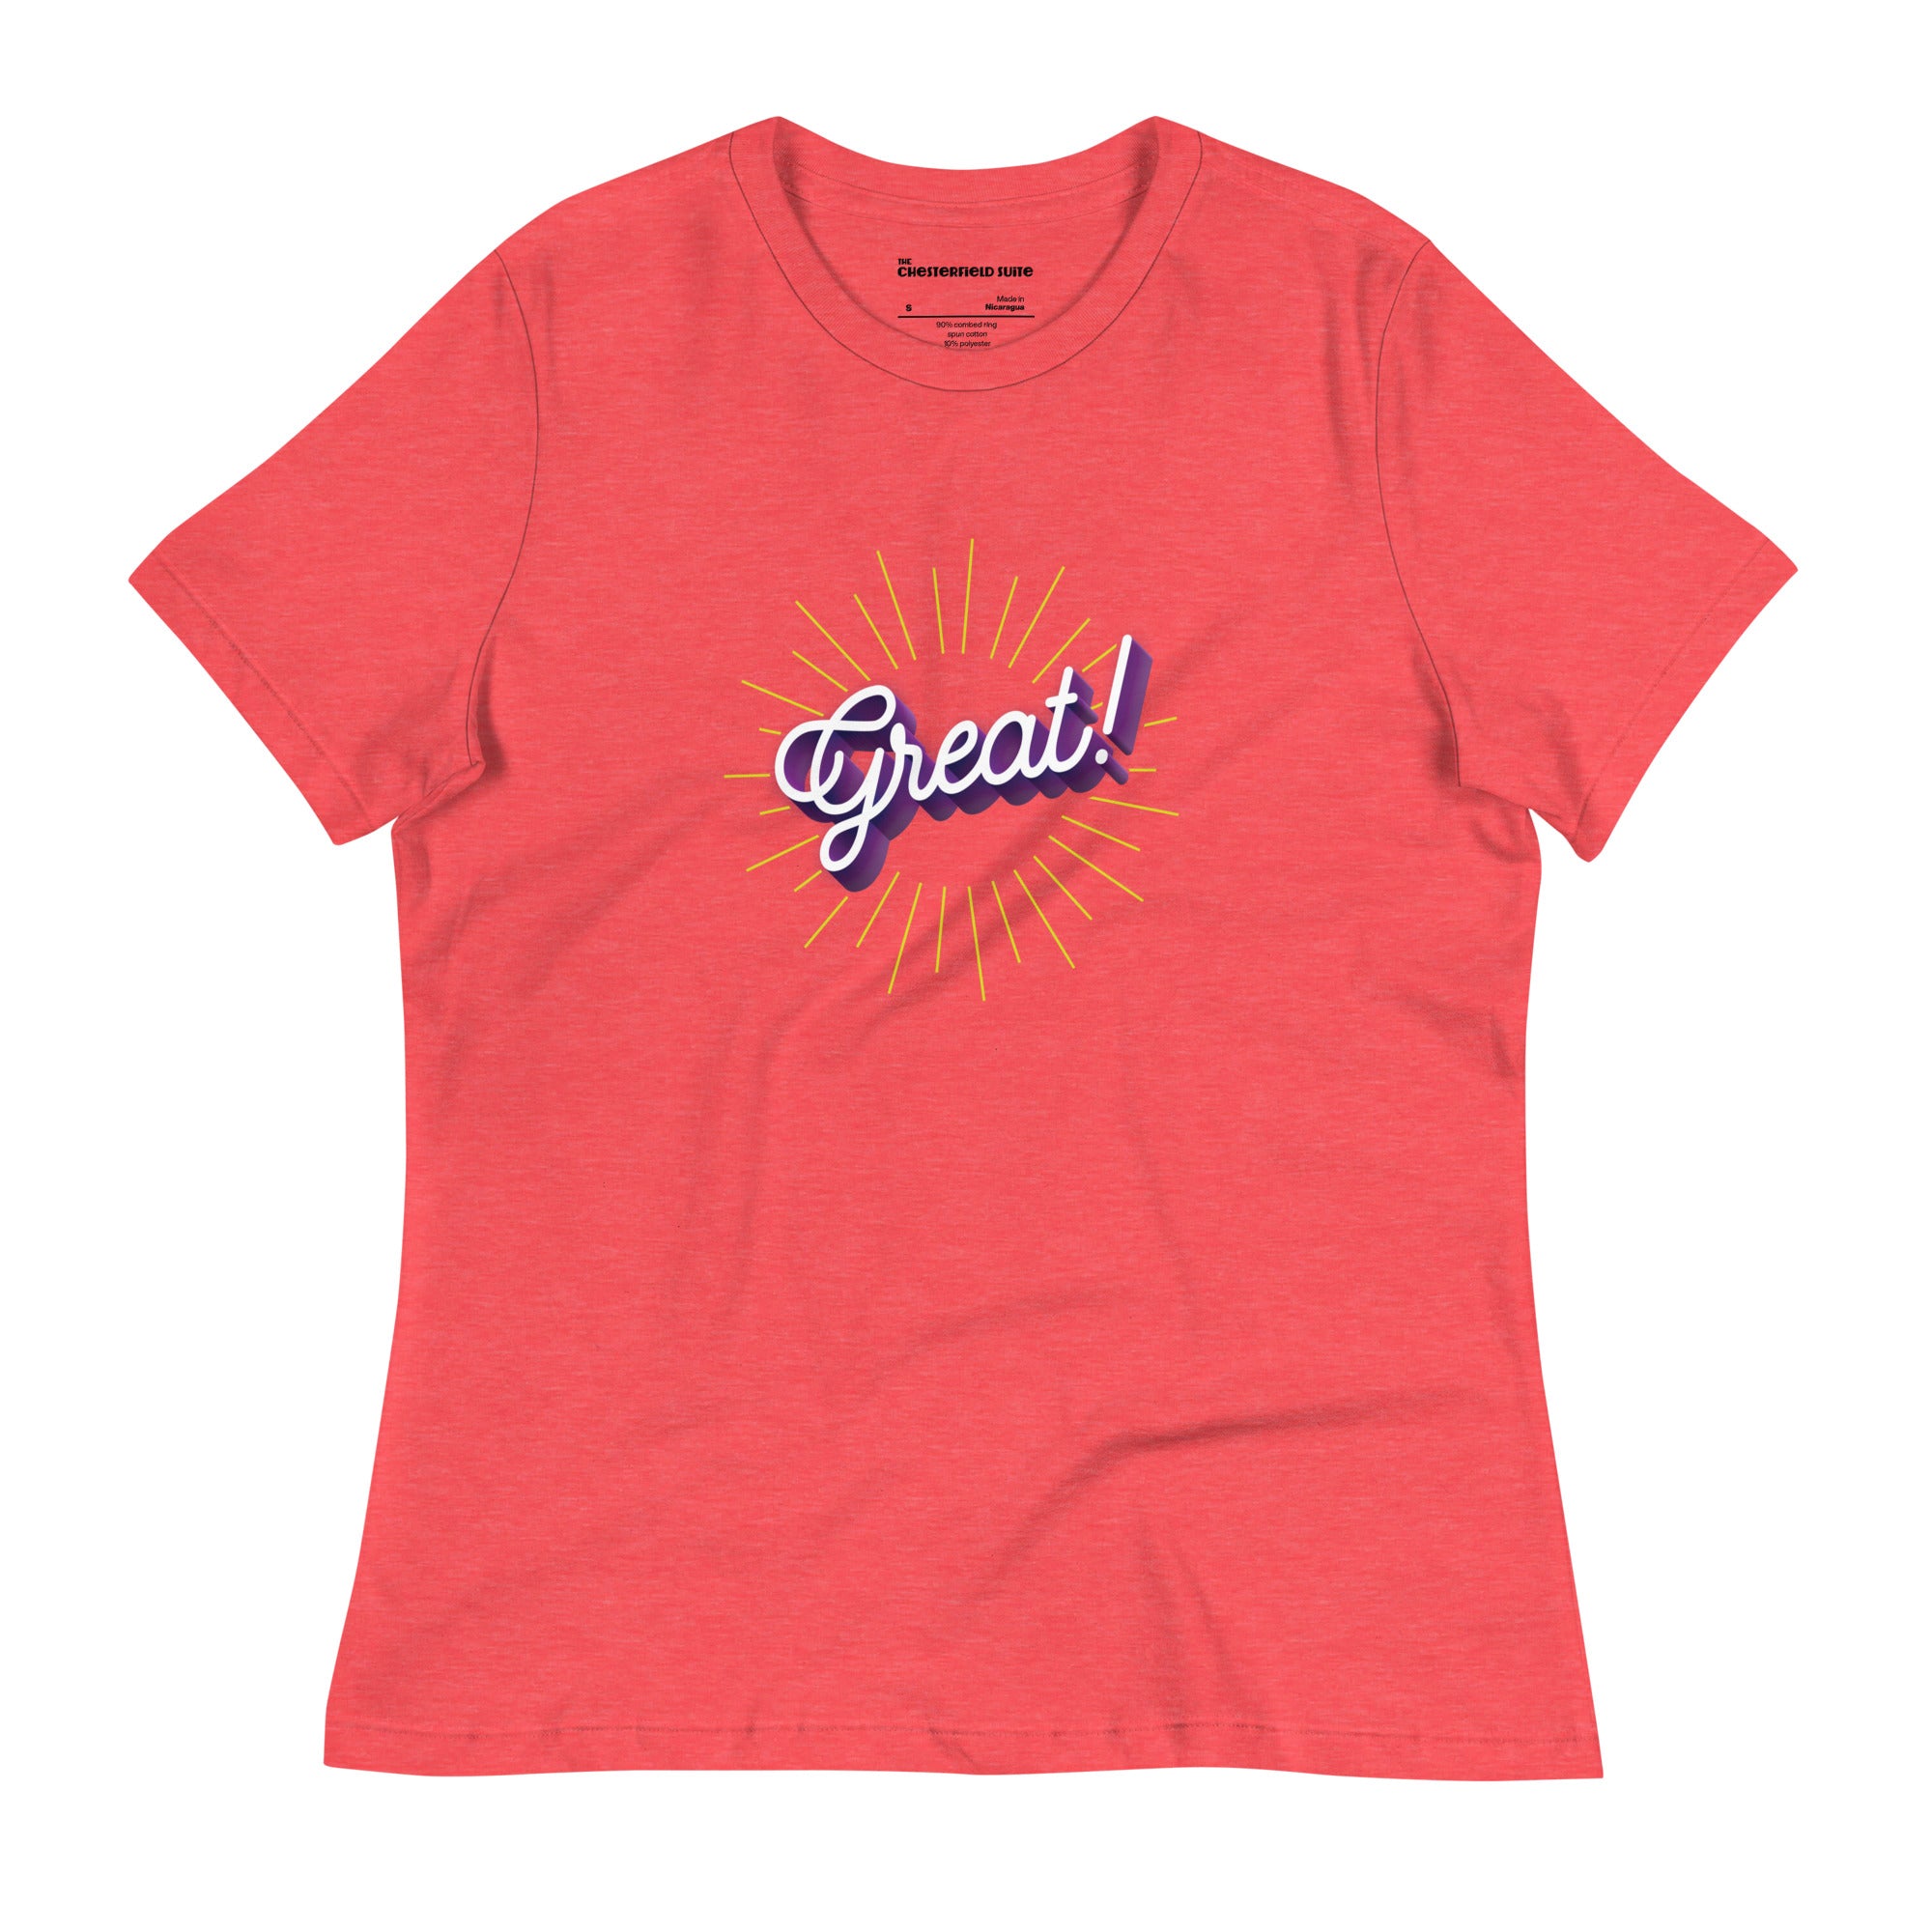 The word great! in cursive on red women's t-shirt